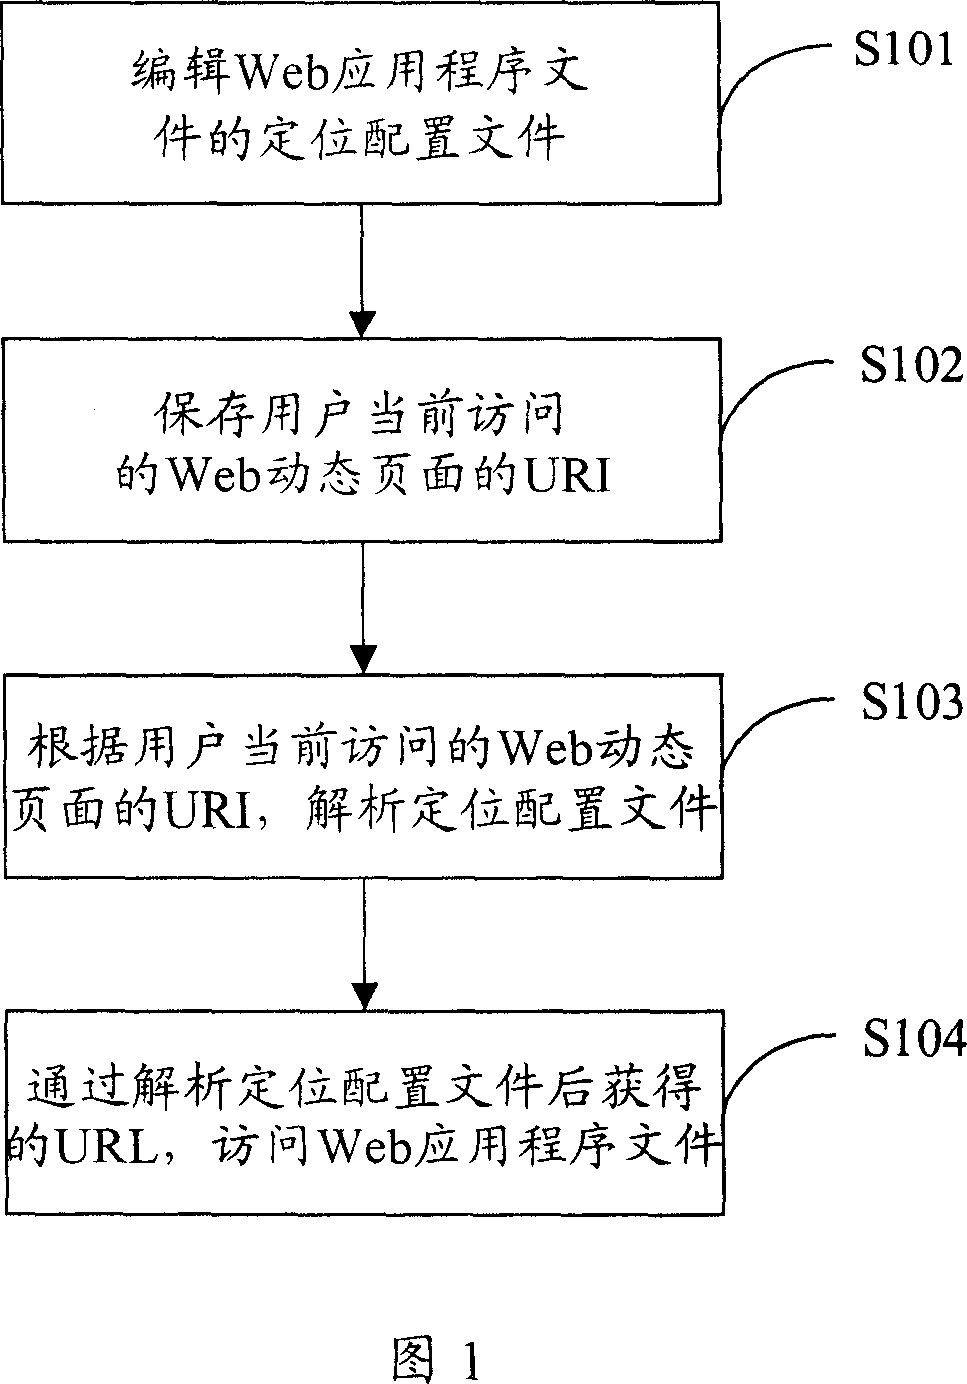 Method and system for accessing file of Wcb application program